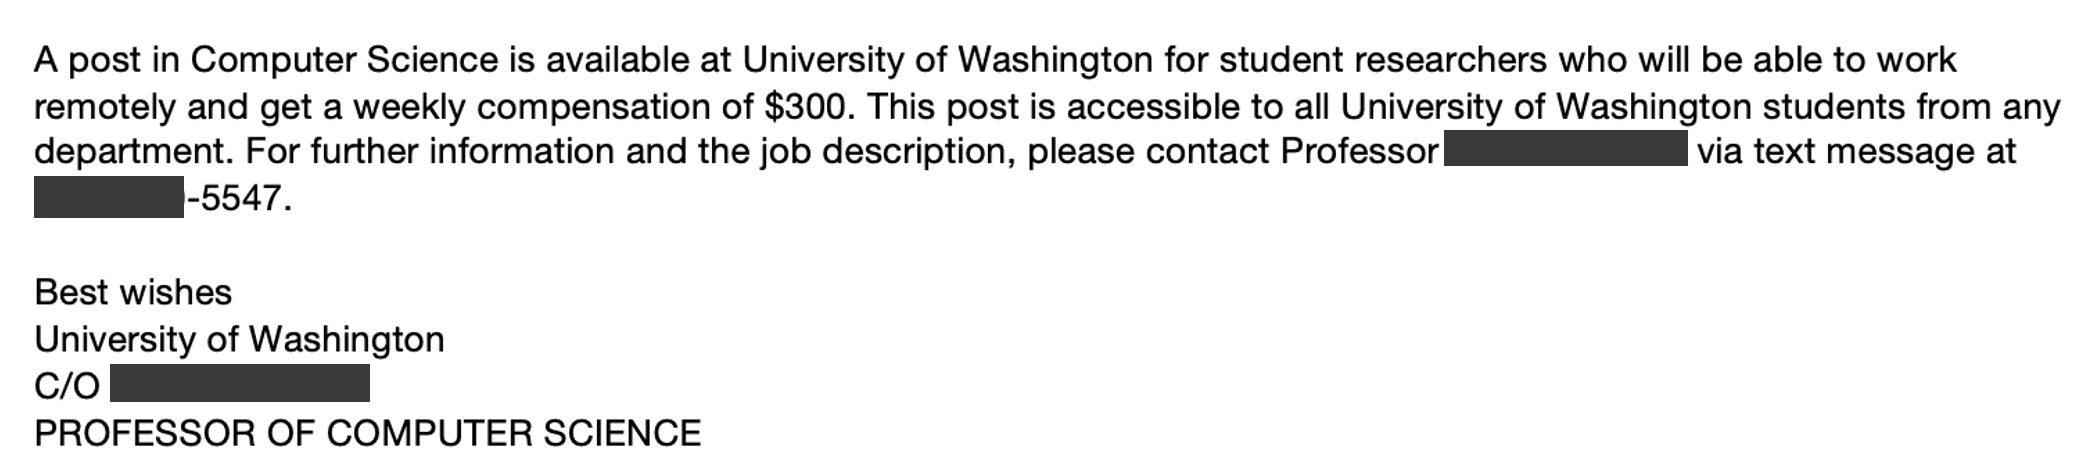 A scam email that claims to advertise a position for a student researcher in the CSE department.